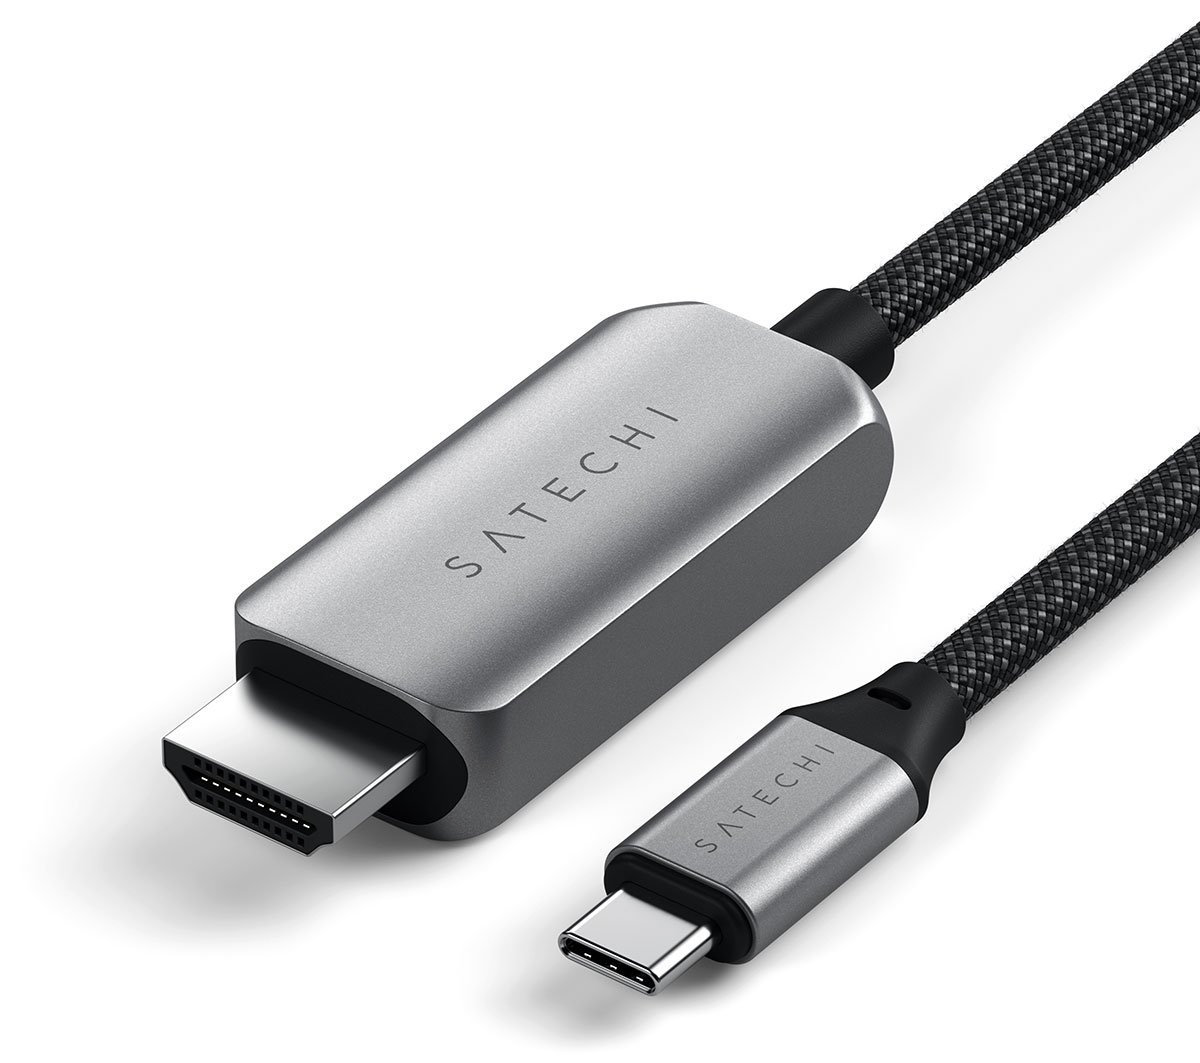 USB-C to HDMI cable for 4K/5K video viewing